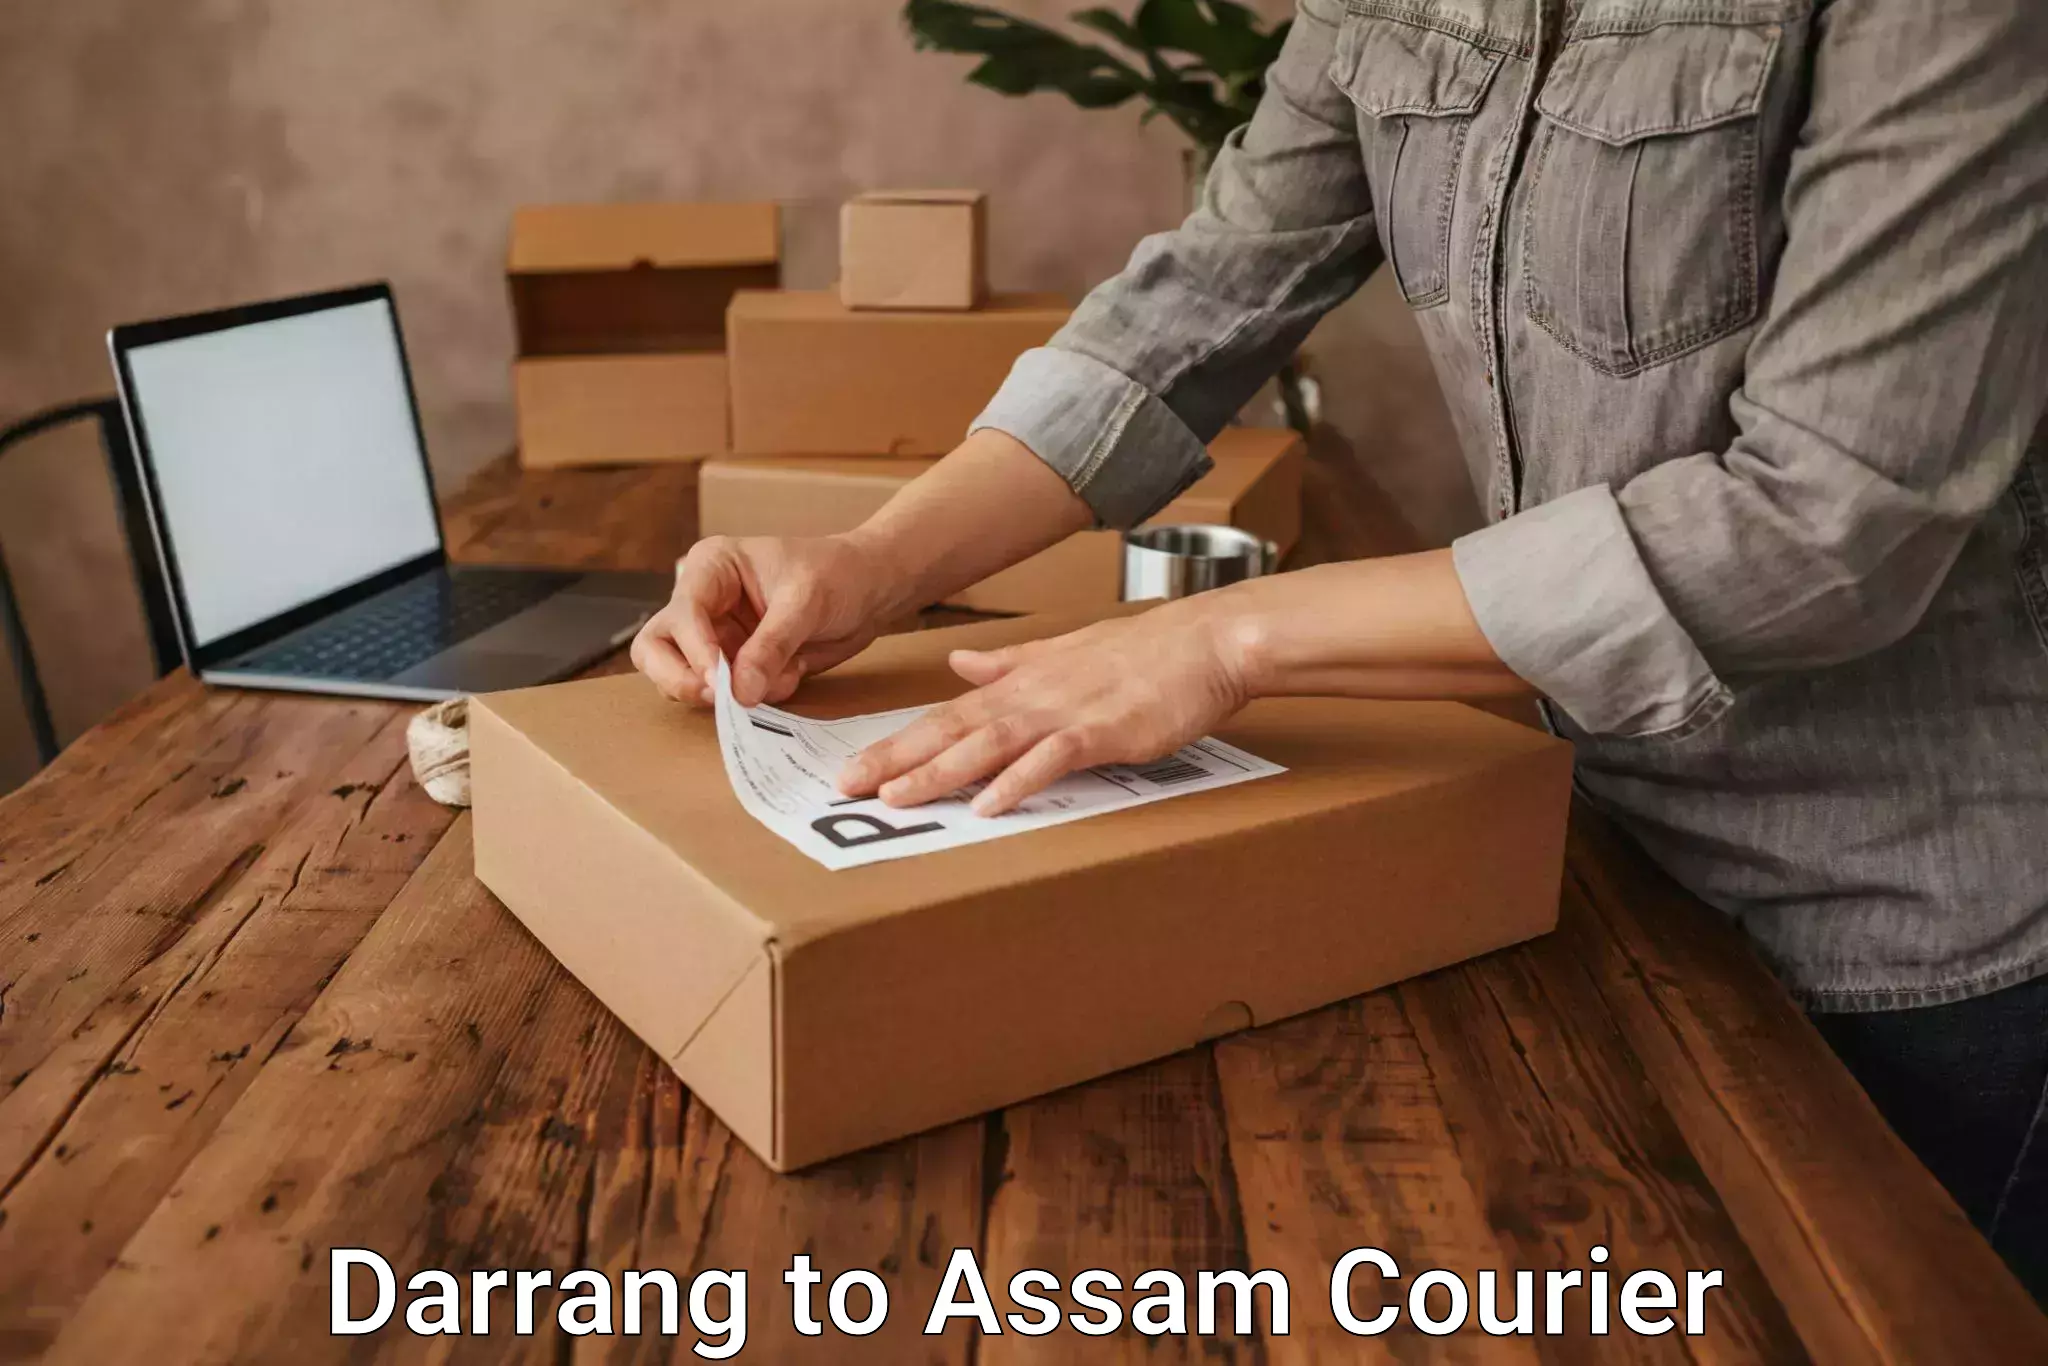 Sustainable courier practices Darrang to Guwahati